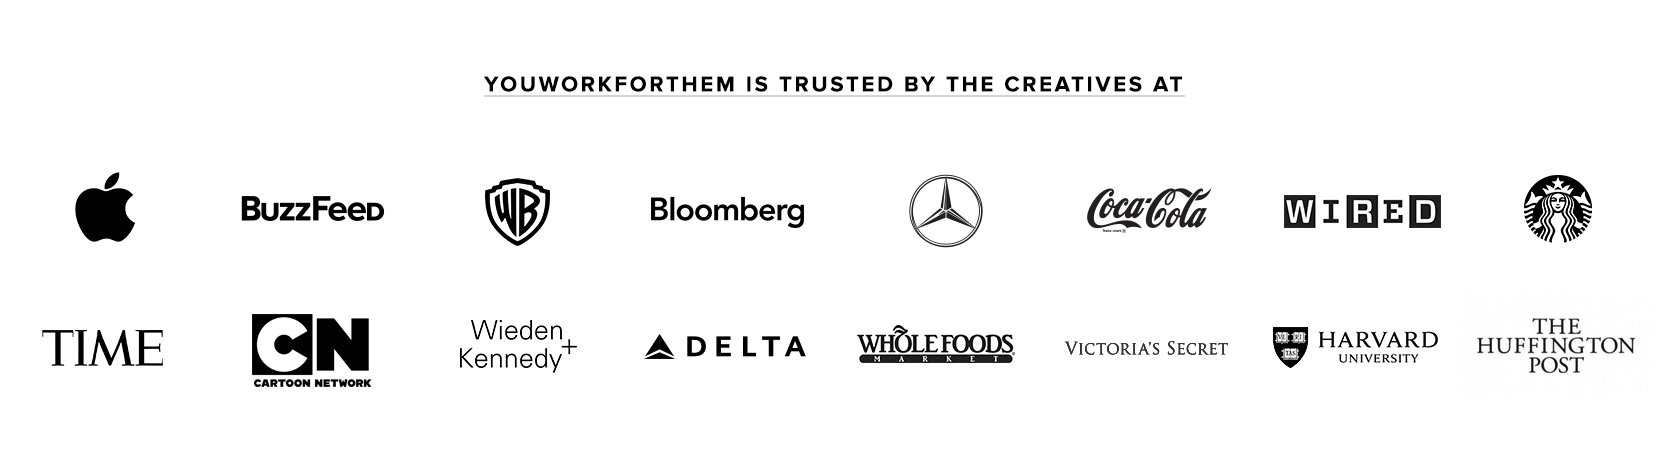 YouWorkThem is trusted buy creatives at